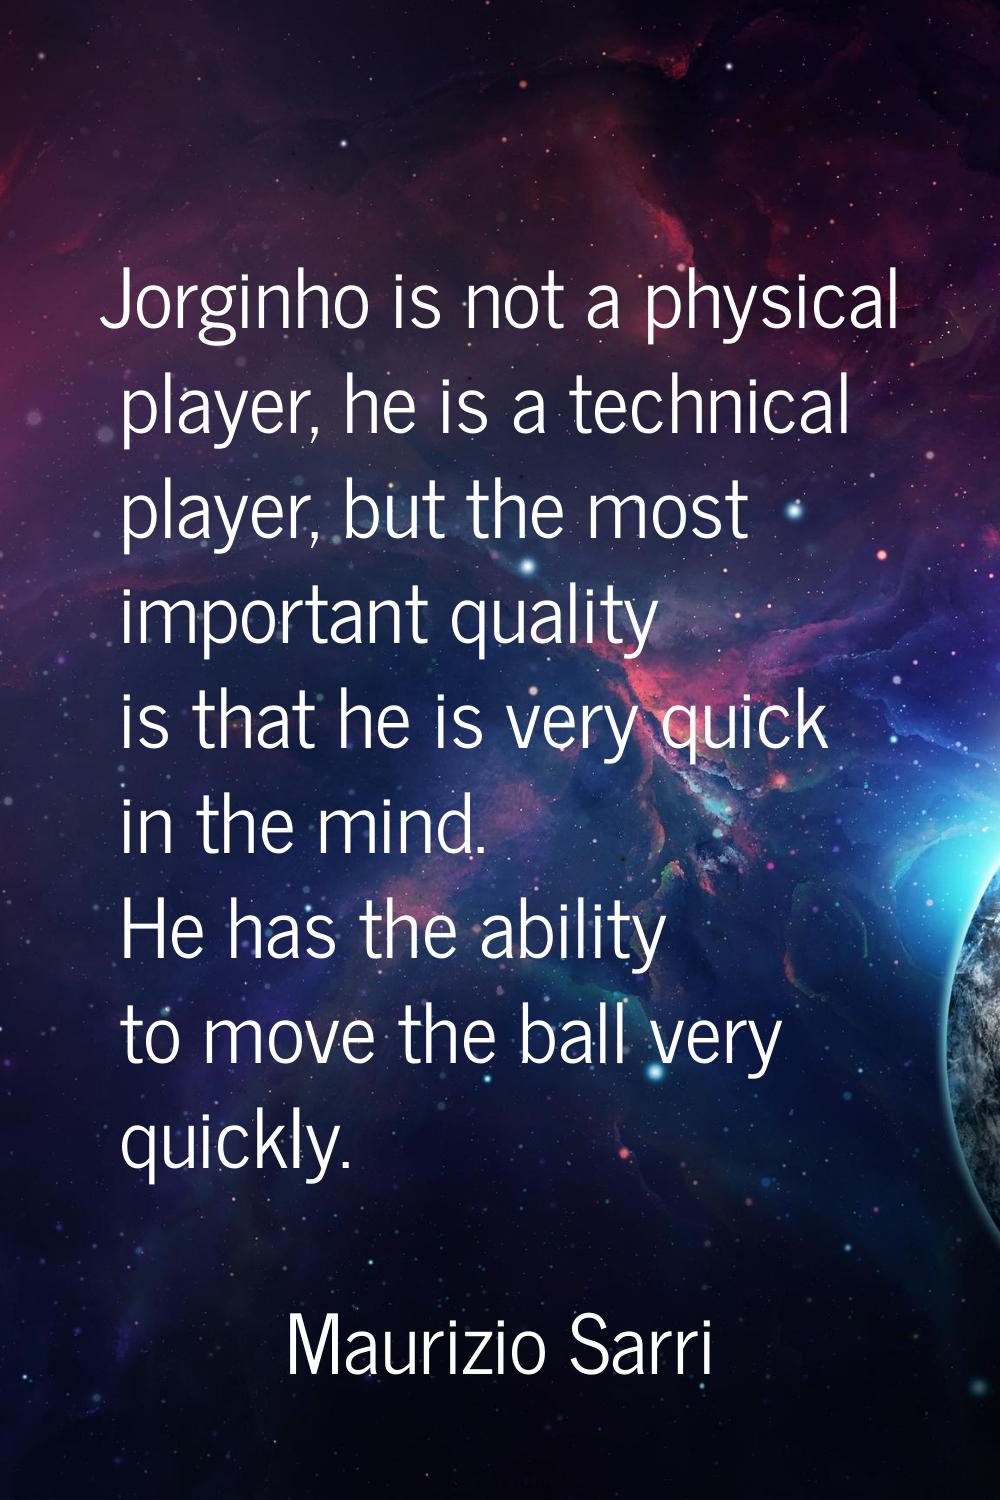 Jorginho is not a physical player, he is a technical player, but the most important quality is that